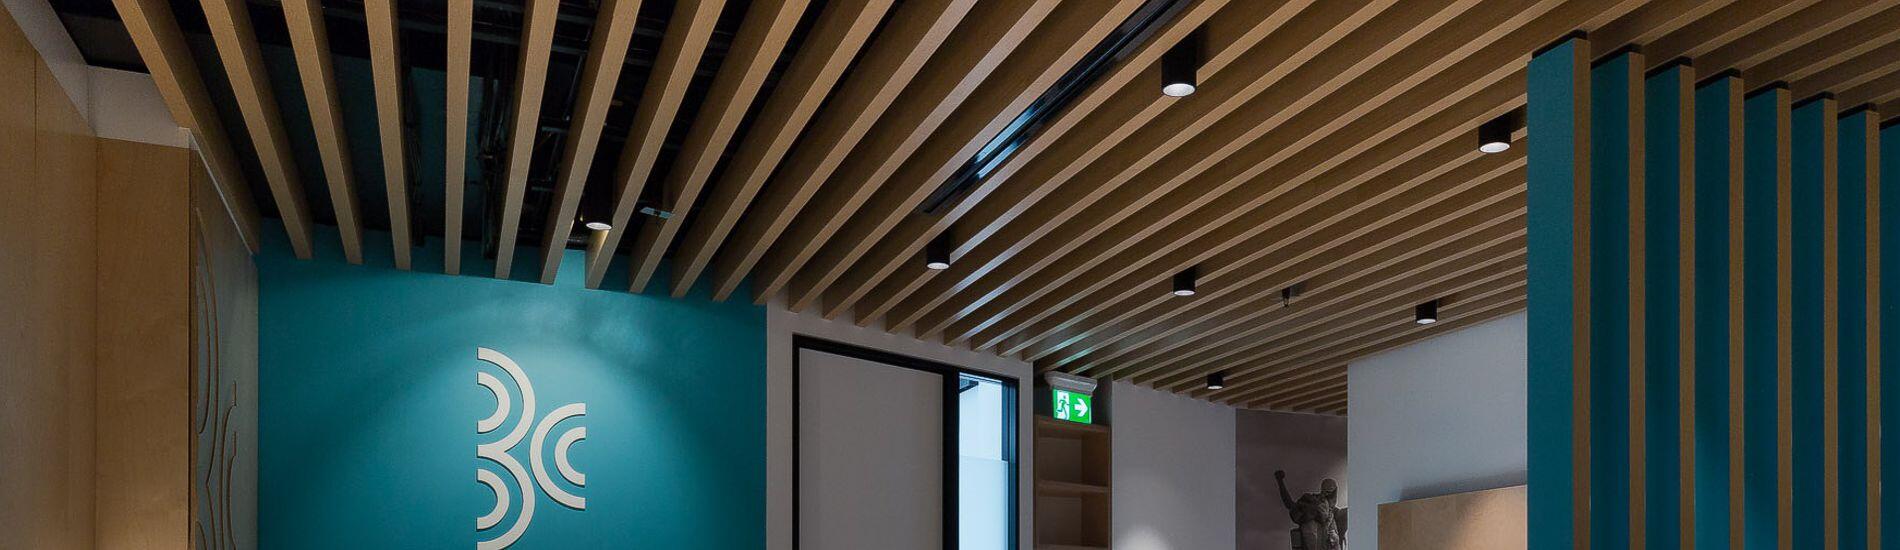 Aesthetic Lightweight MAXI BEAM Ceiling and Screens in Sports Injury Clinic